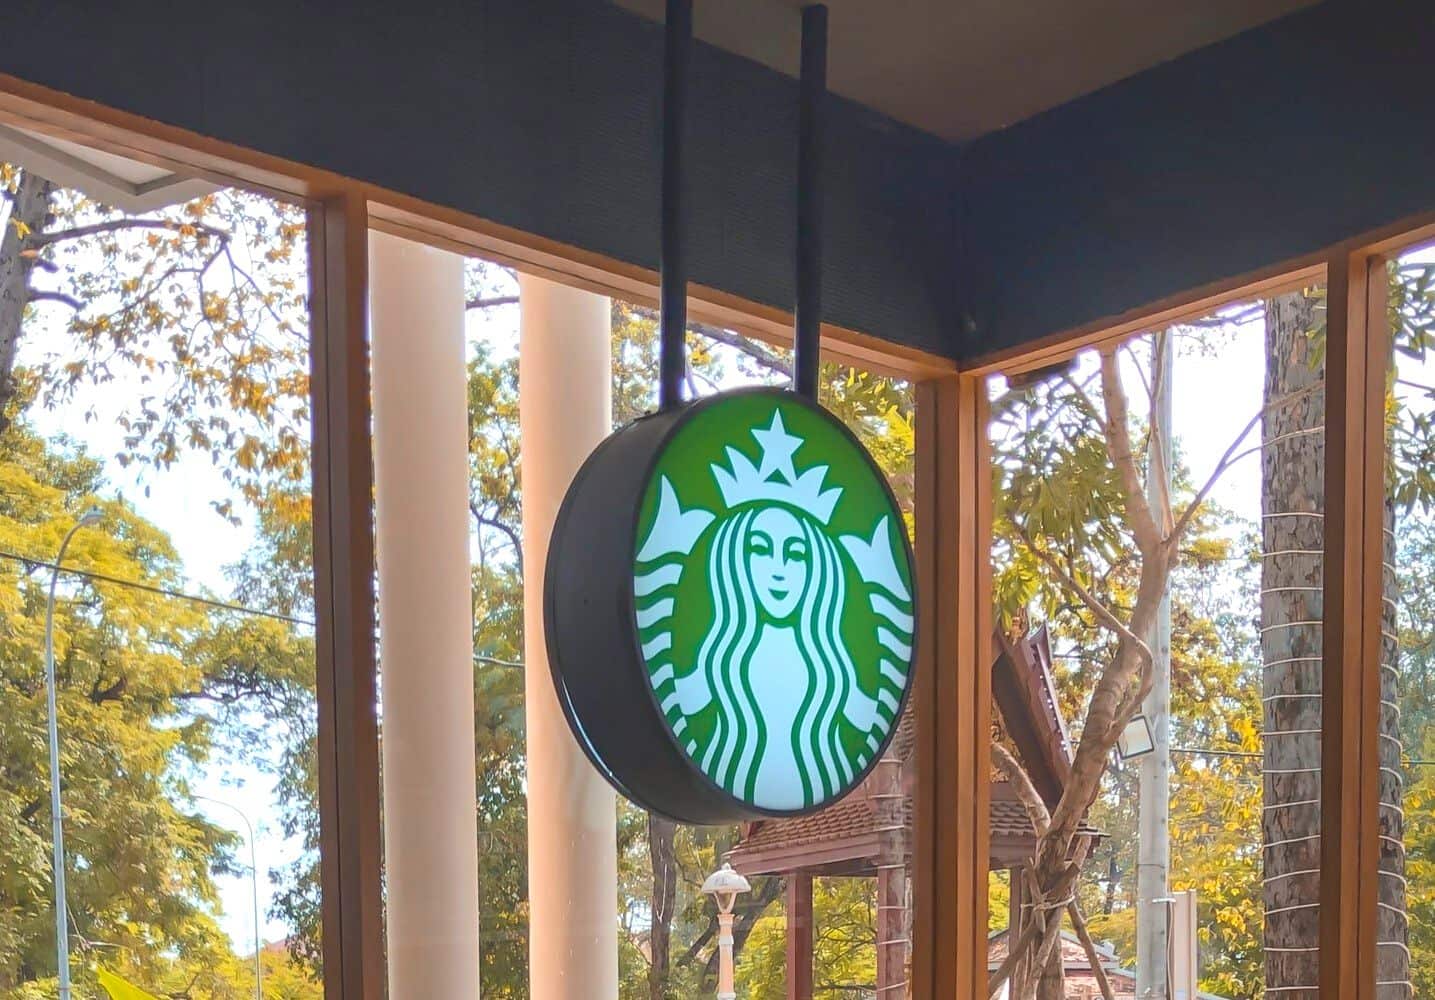 Starbucks will officially announce its Web3 initiative and its first NFT collection in September